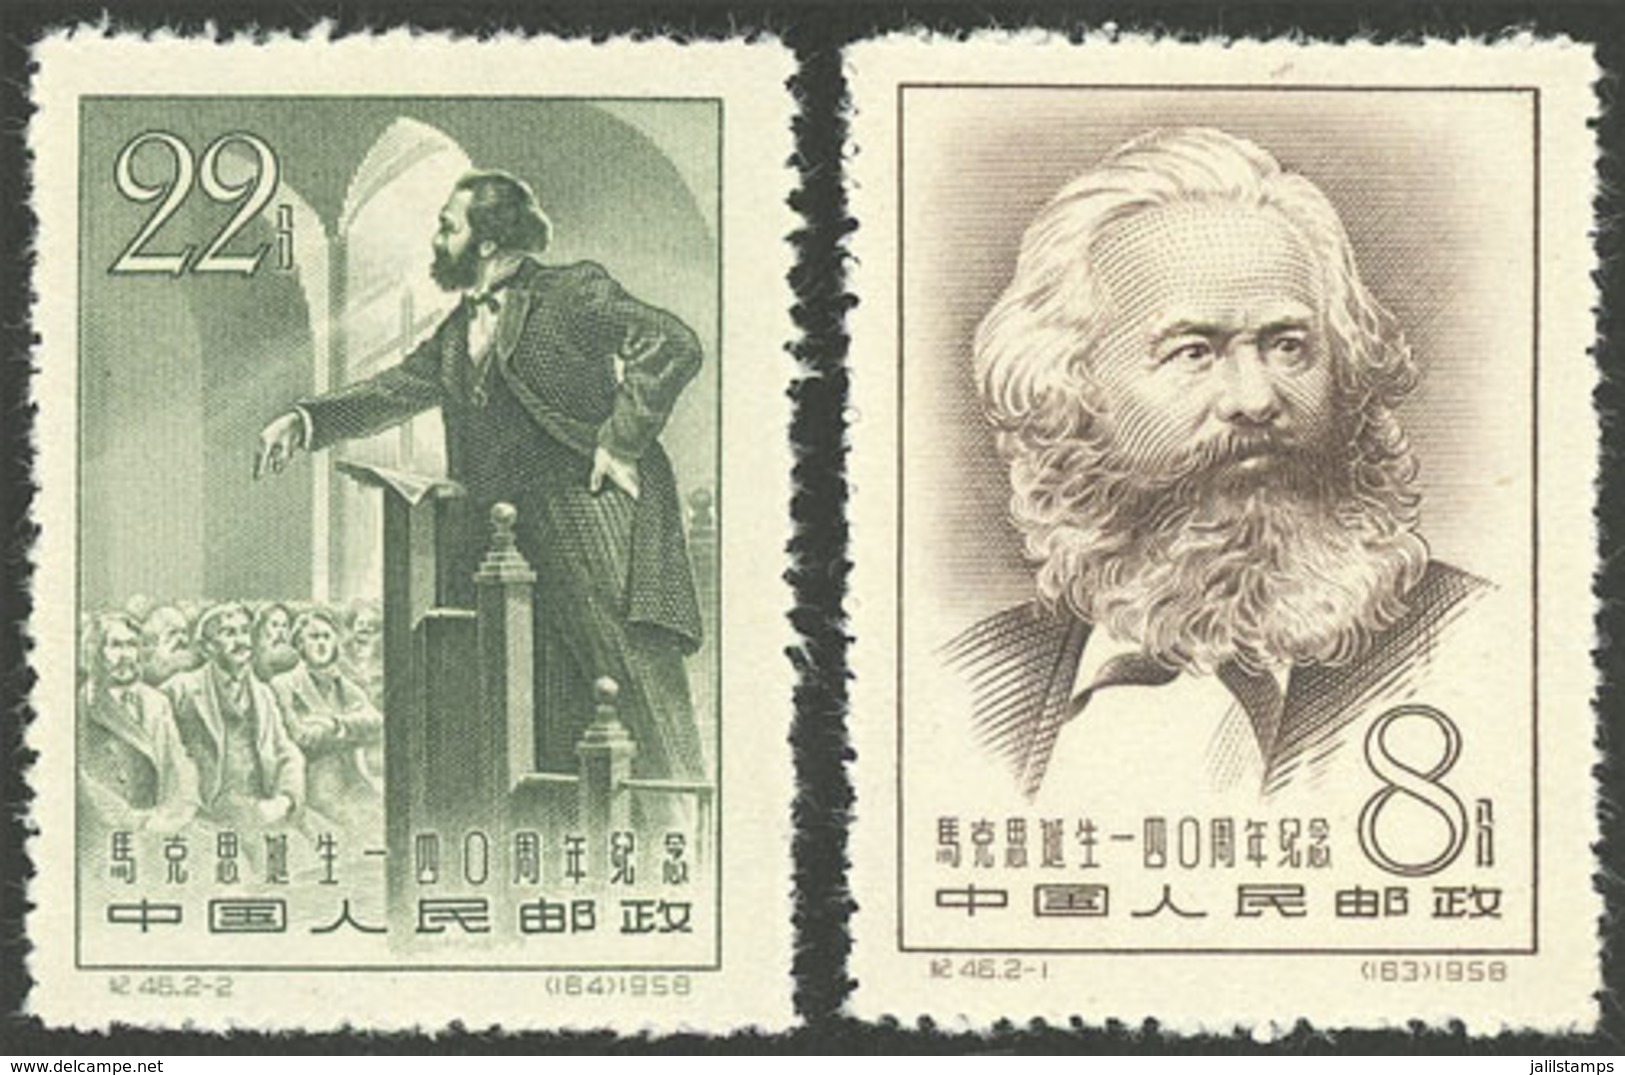 CHINA: Sc.345/346, 1958 Karl Marx, Cmpl. Set Of 2 Values, Mint Lightly Hinged (issued Without Gum), VF Quality! - Usati